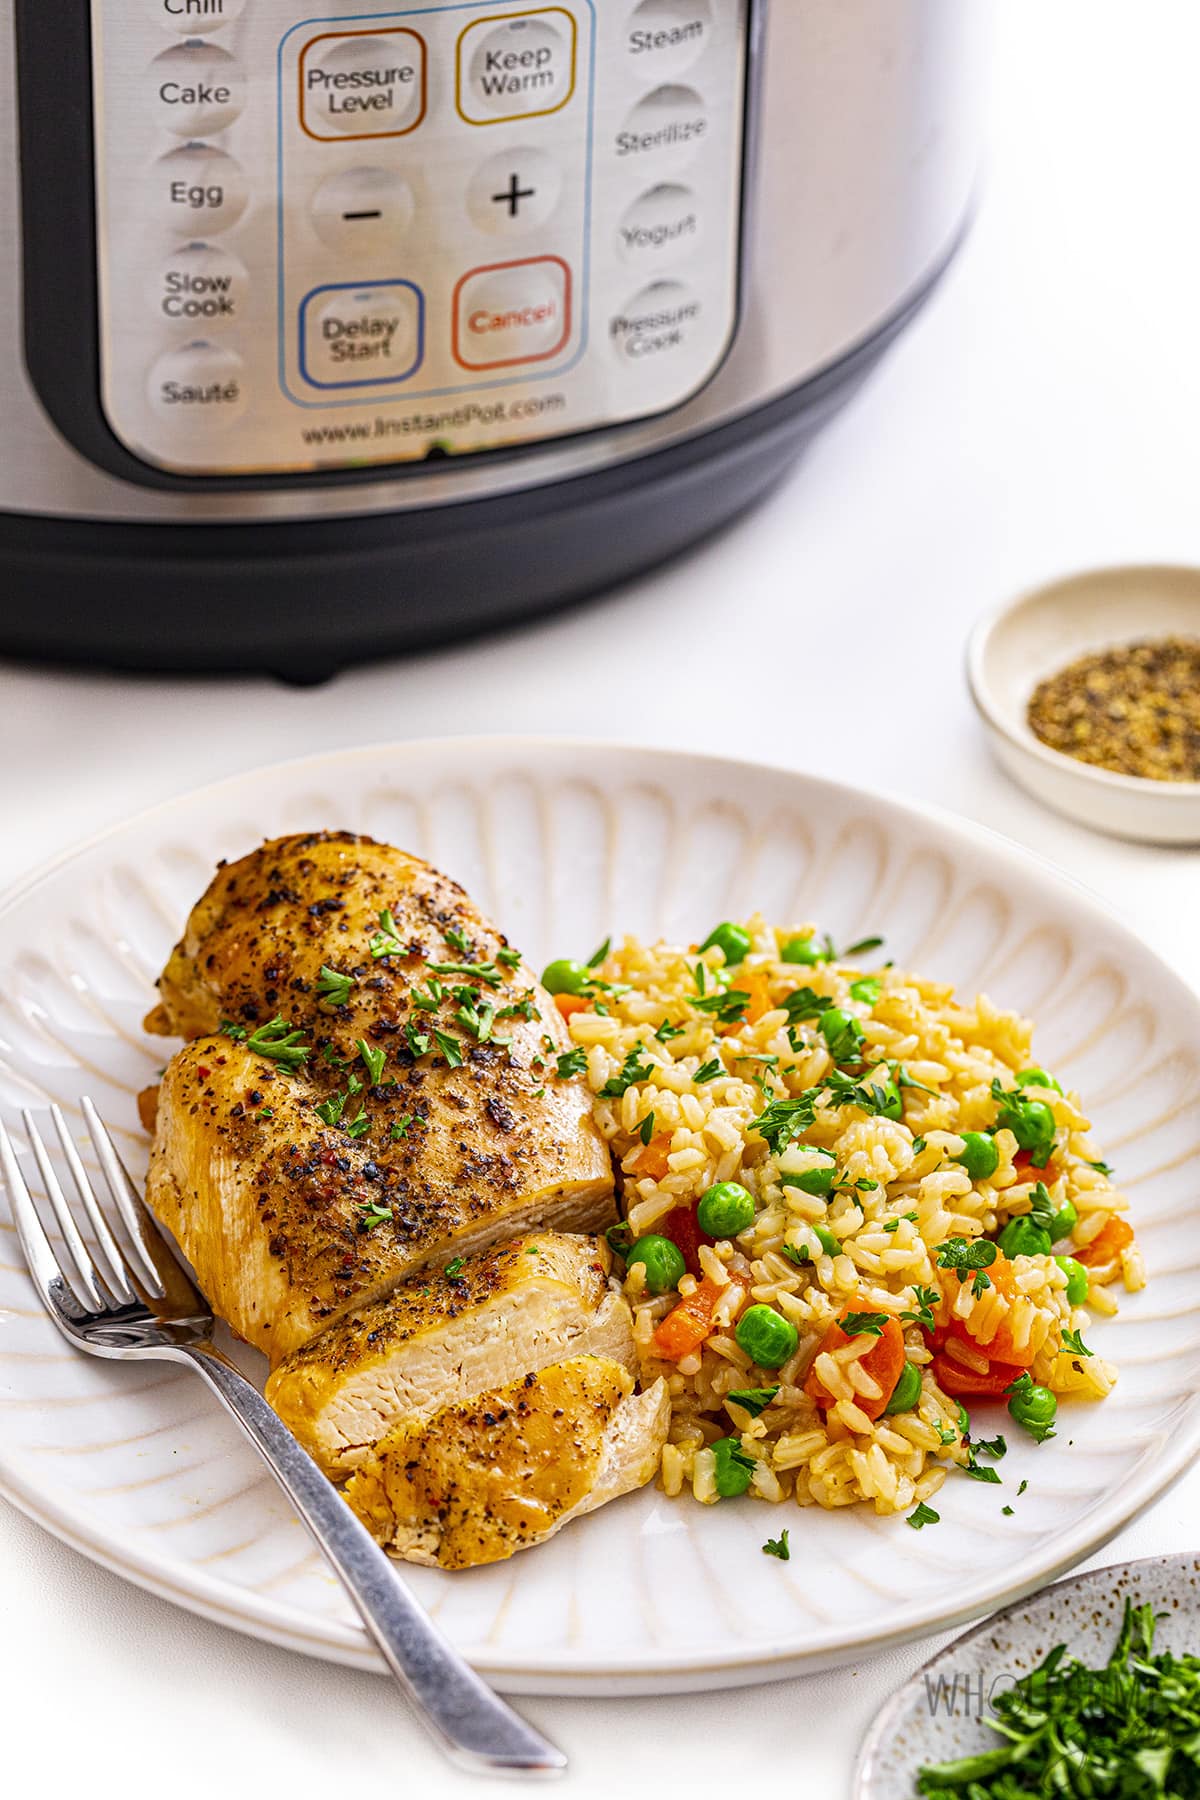 Instant Pot chicken and rice on a plate, with Instant Pot in the background.